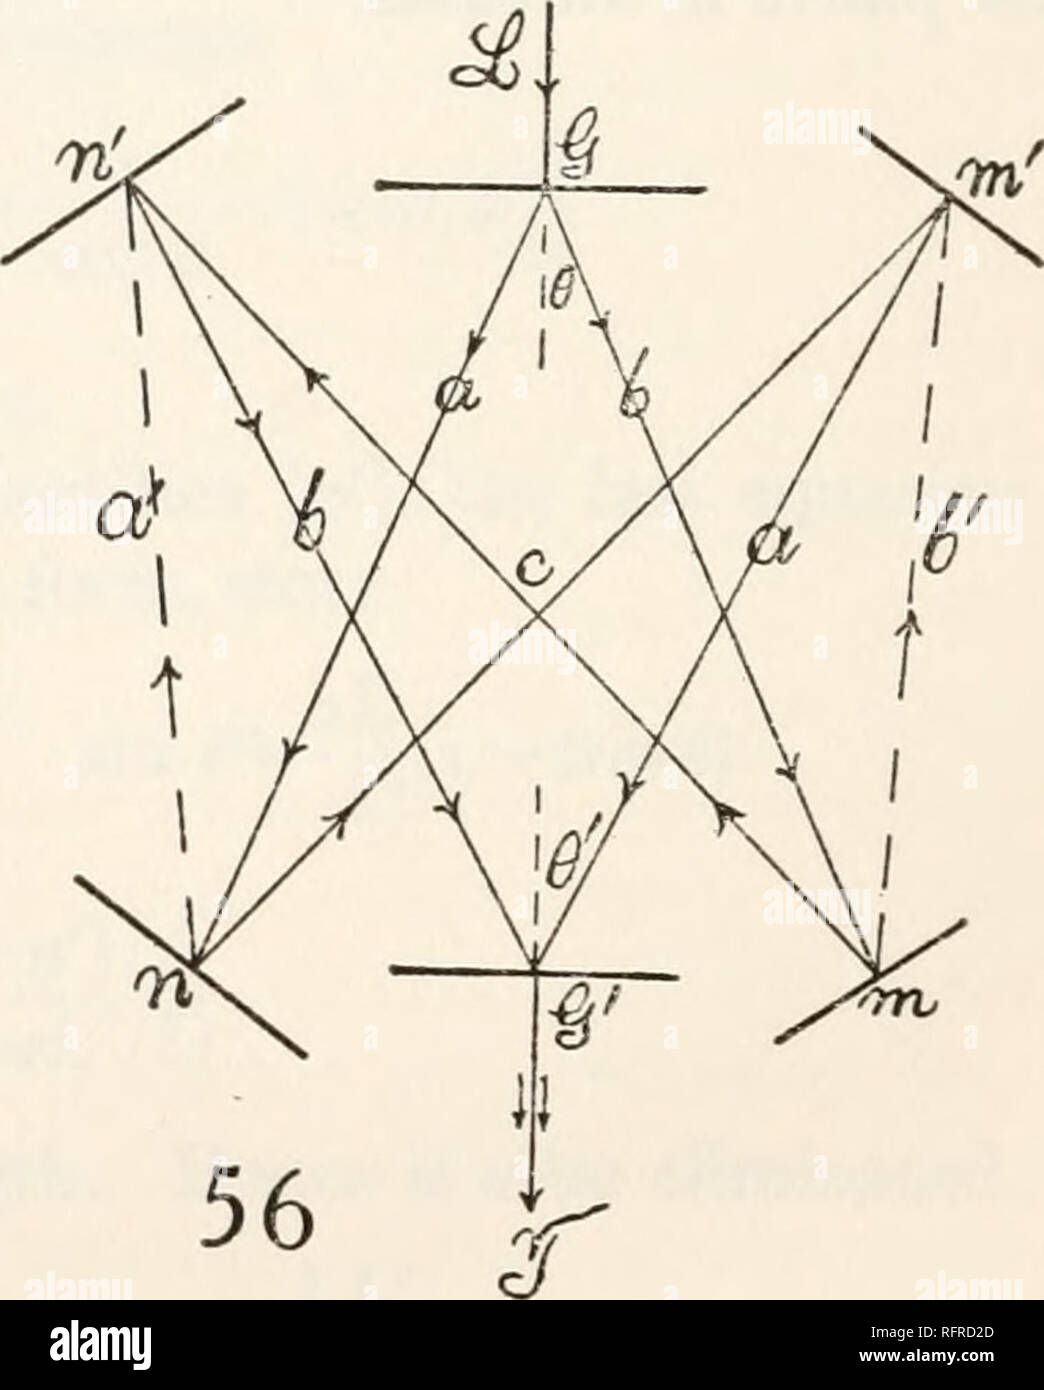 . Carnegie Institution of Washington publication. CHAPTER V. ynf INTERFEROMETERS FOR PARALLEL AND FOR CROSSED RAYS. 34. Introduction. Methods.—To exchange the component beams of the interferometer, to mutually replace the two pencils which interfere, is not an unusual desideratum, for instance, in the famous experiment of Michelson and Morley. To replace two pencils of component rays, traveling more or less parallel to each other, by pencils moving more or less normal to each other, or to be able to operate upon pencils of corresponding rays (from the same source, crossing each other at any an Stock Photo